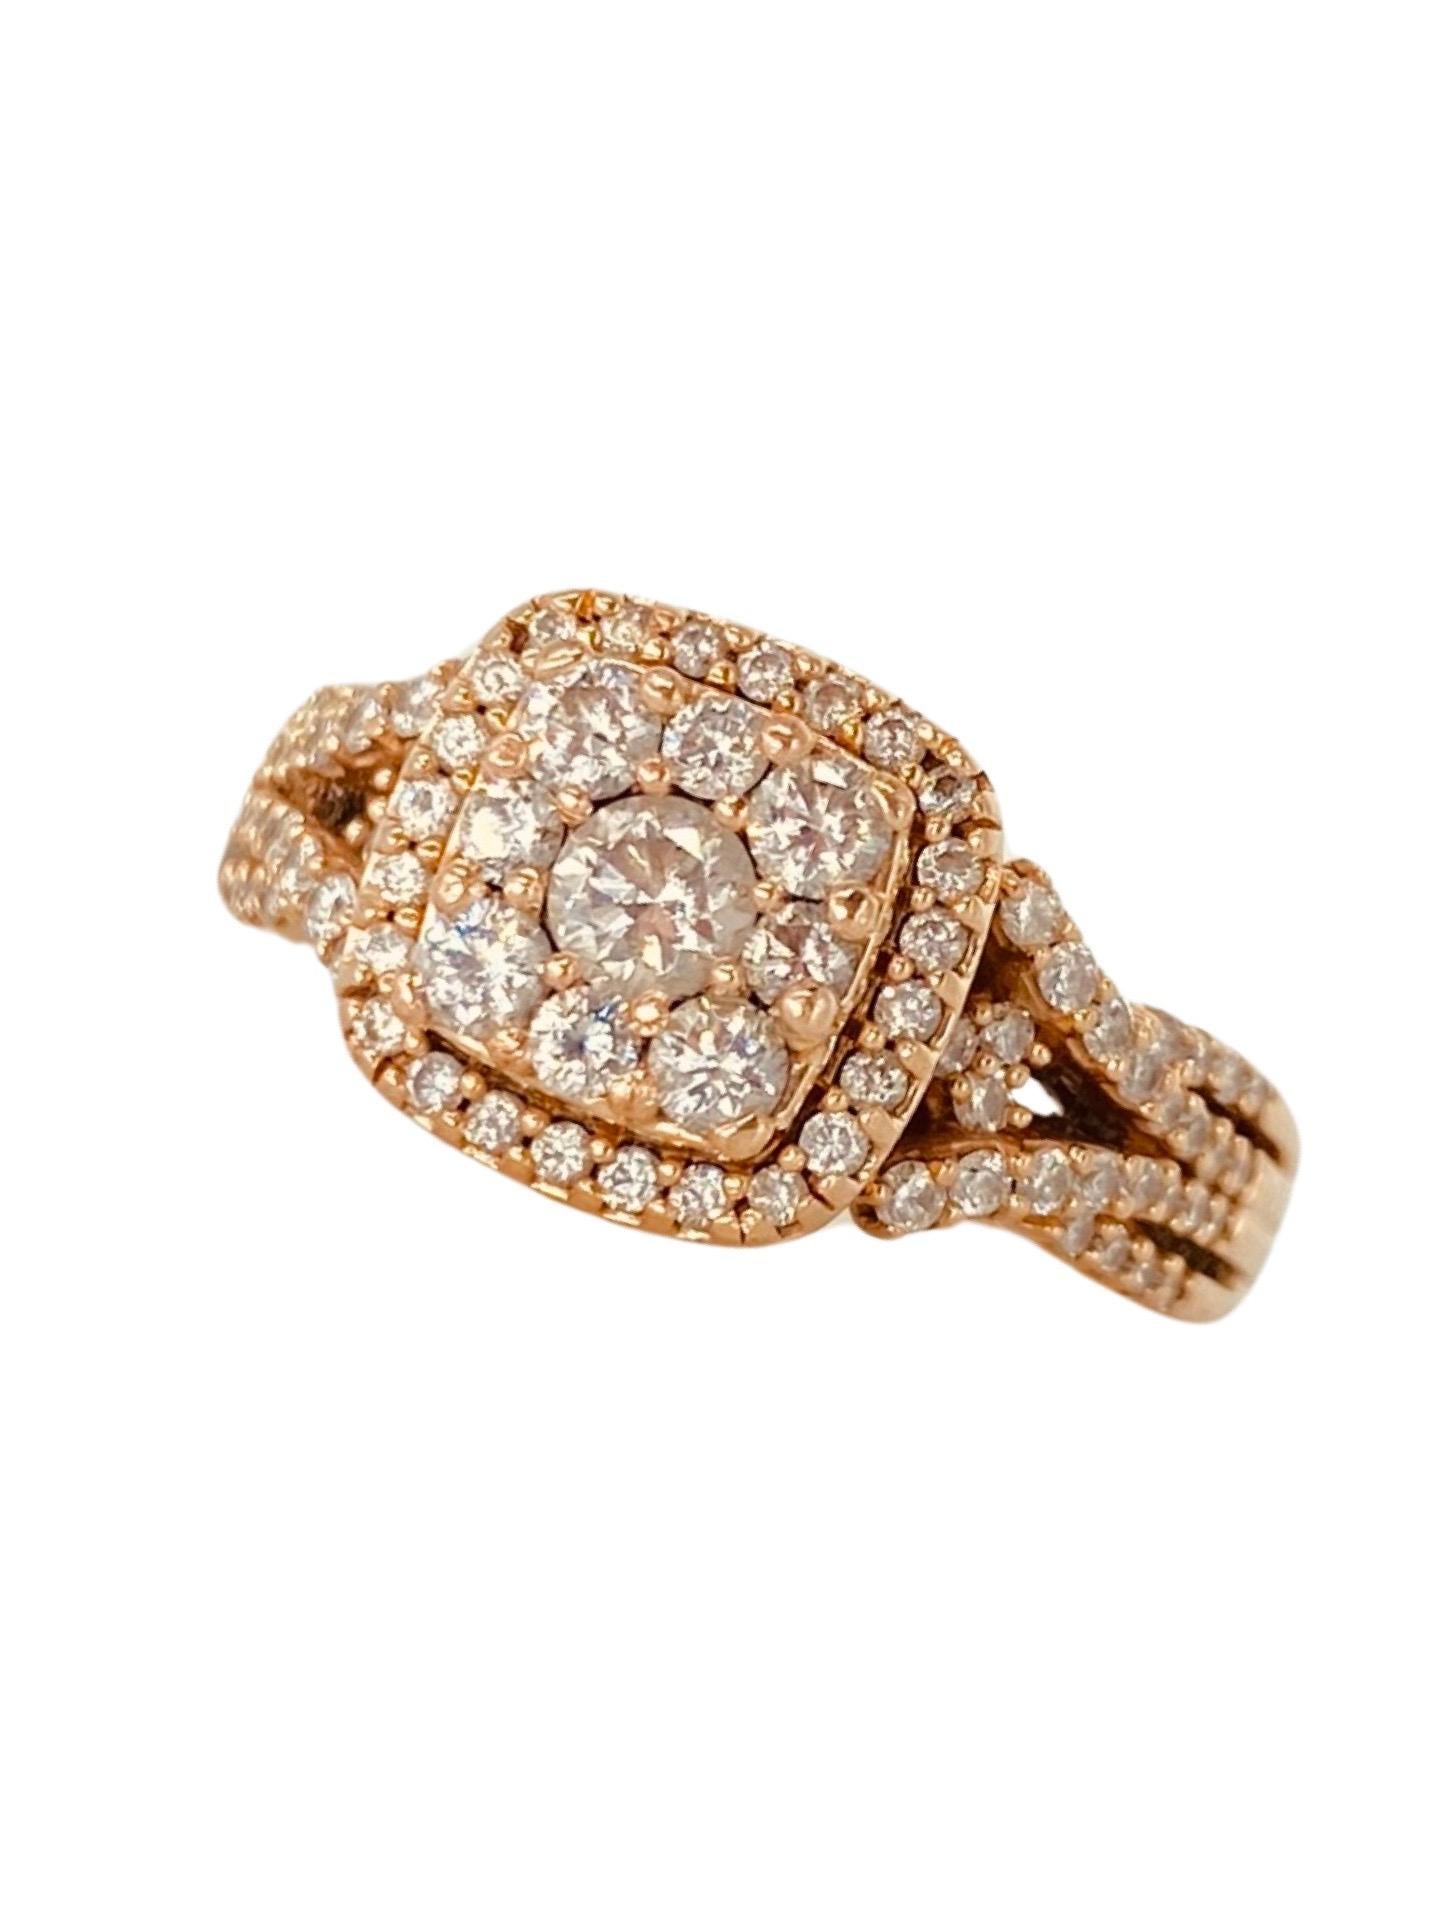 Vintage 1.50 Carat Total Weight in Diamonds Ring 14k Rose Gold. Beautiful and very impressive work on this ring by the designer. Many details are pointed out while examining the ring. There are round diamonds around the sides of the ring on the